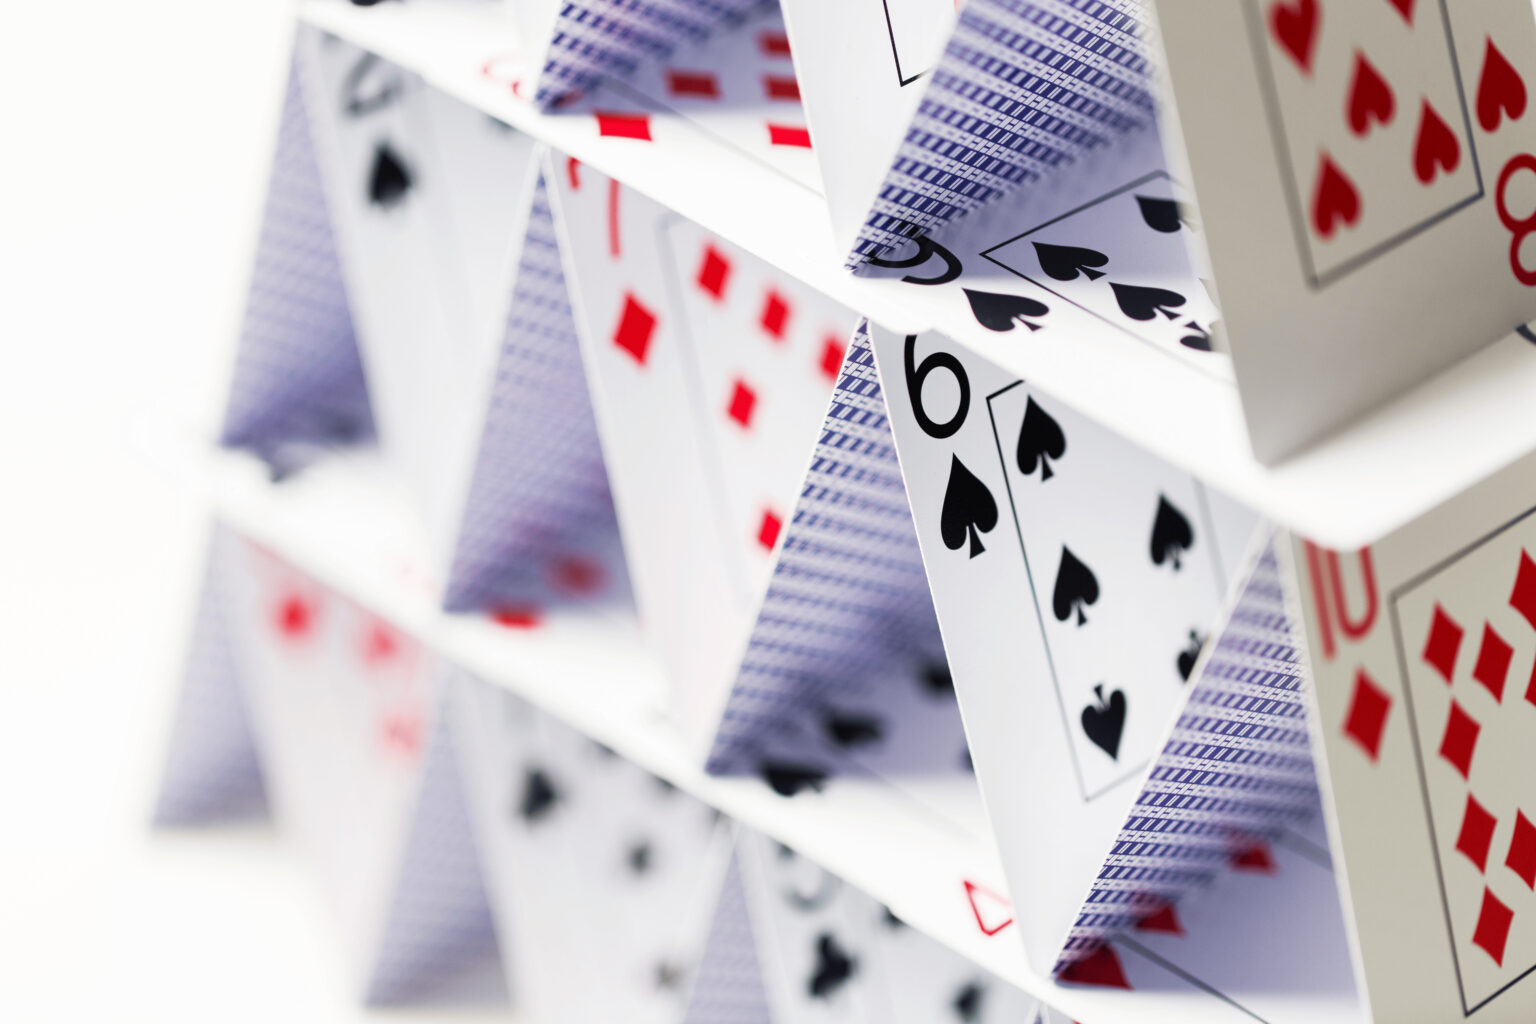 A house of cards, which is what your leadership is like if you aren’t taking ownership and accountability in leadership.